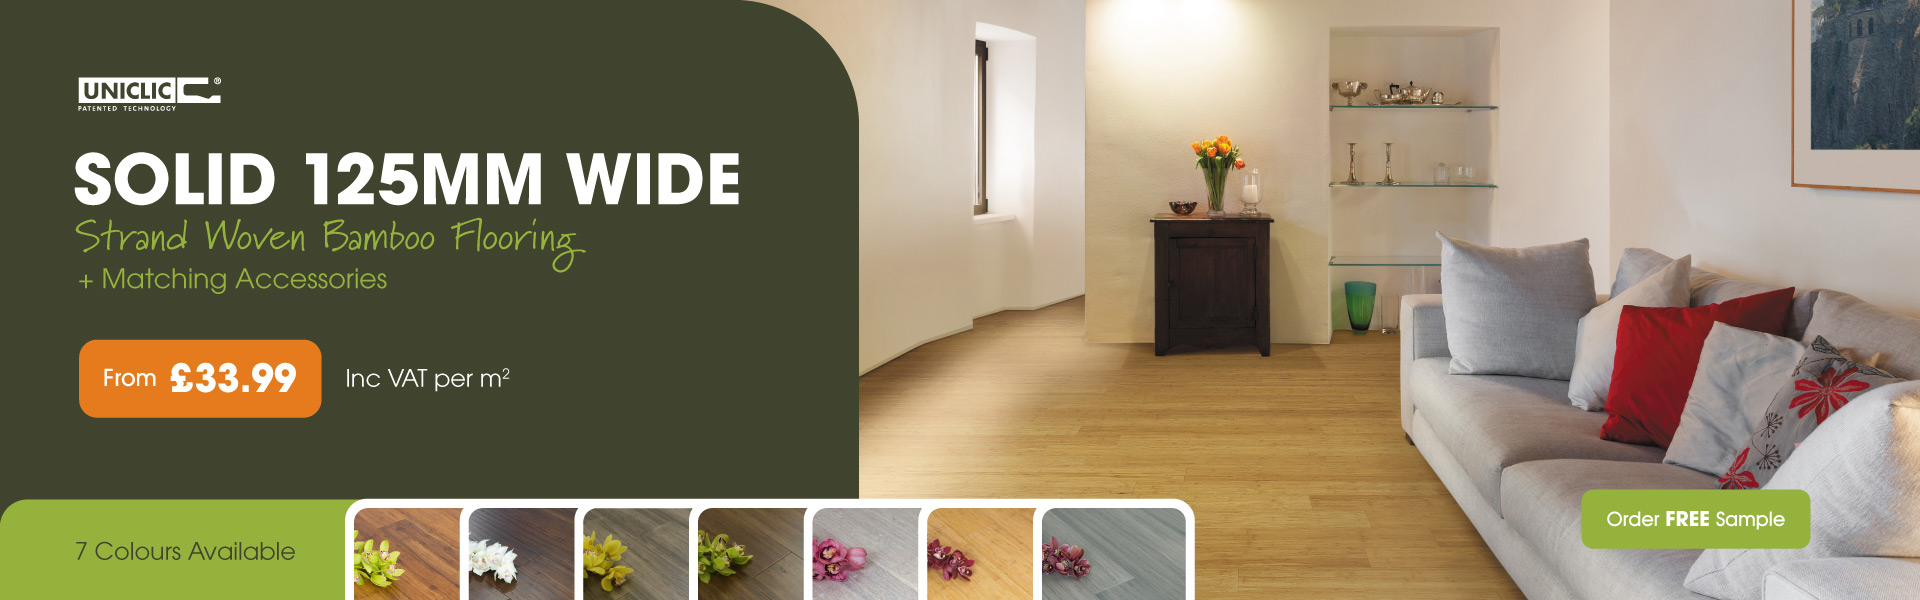 Solid 125mm Wide Strand Woven Bamboo Flooring